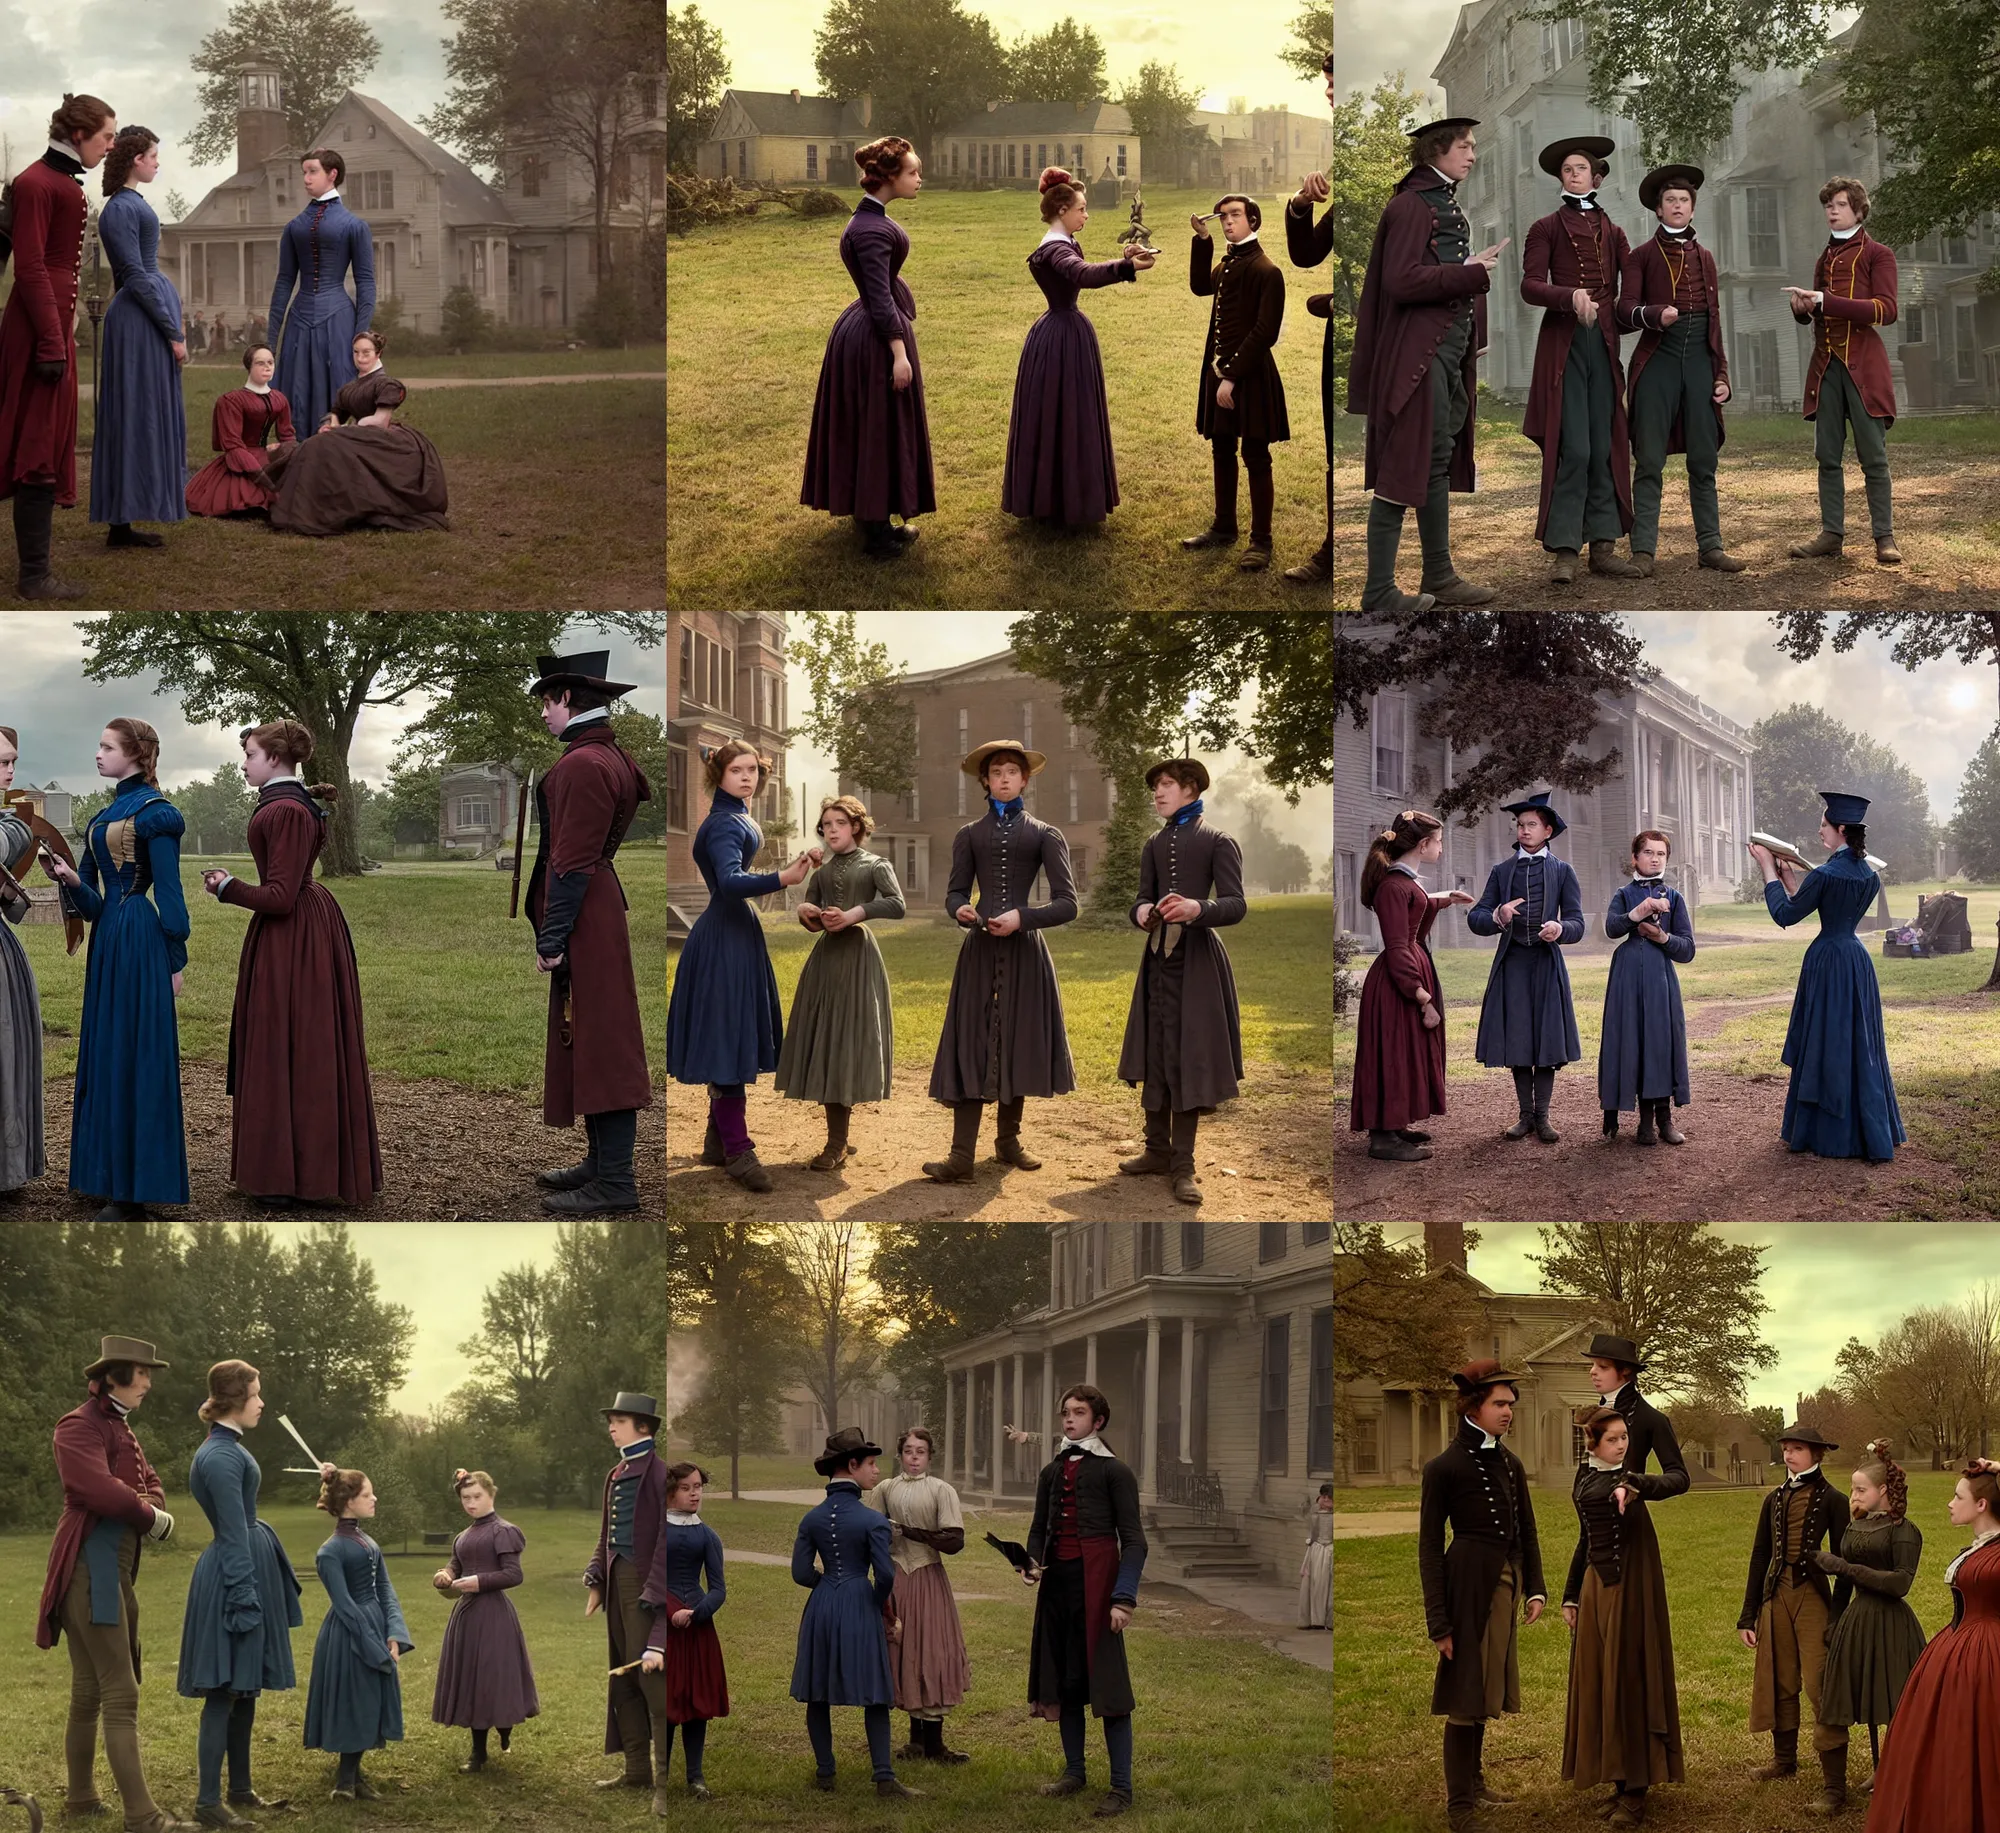 Prompt: sharp lens, detailed, film still from a 2 0 1 9 sci fi blockbuster color movie, set in 1 8 5 0 in an alternate universe, mid distant shot of three students practicing magic, outside the school of magic, 1 8 5 0 s clothing, atmospheric lighting, in focus, reflective eyes, live action, good special effects